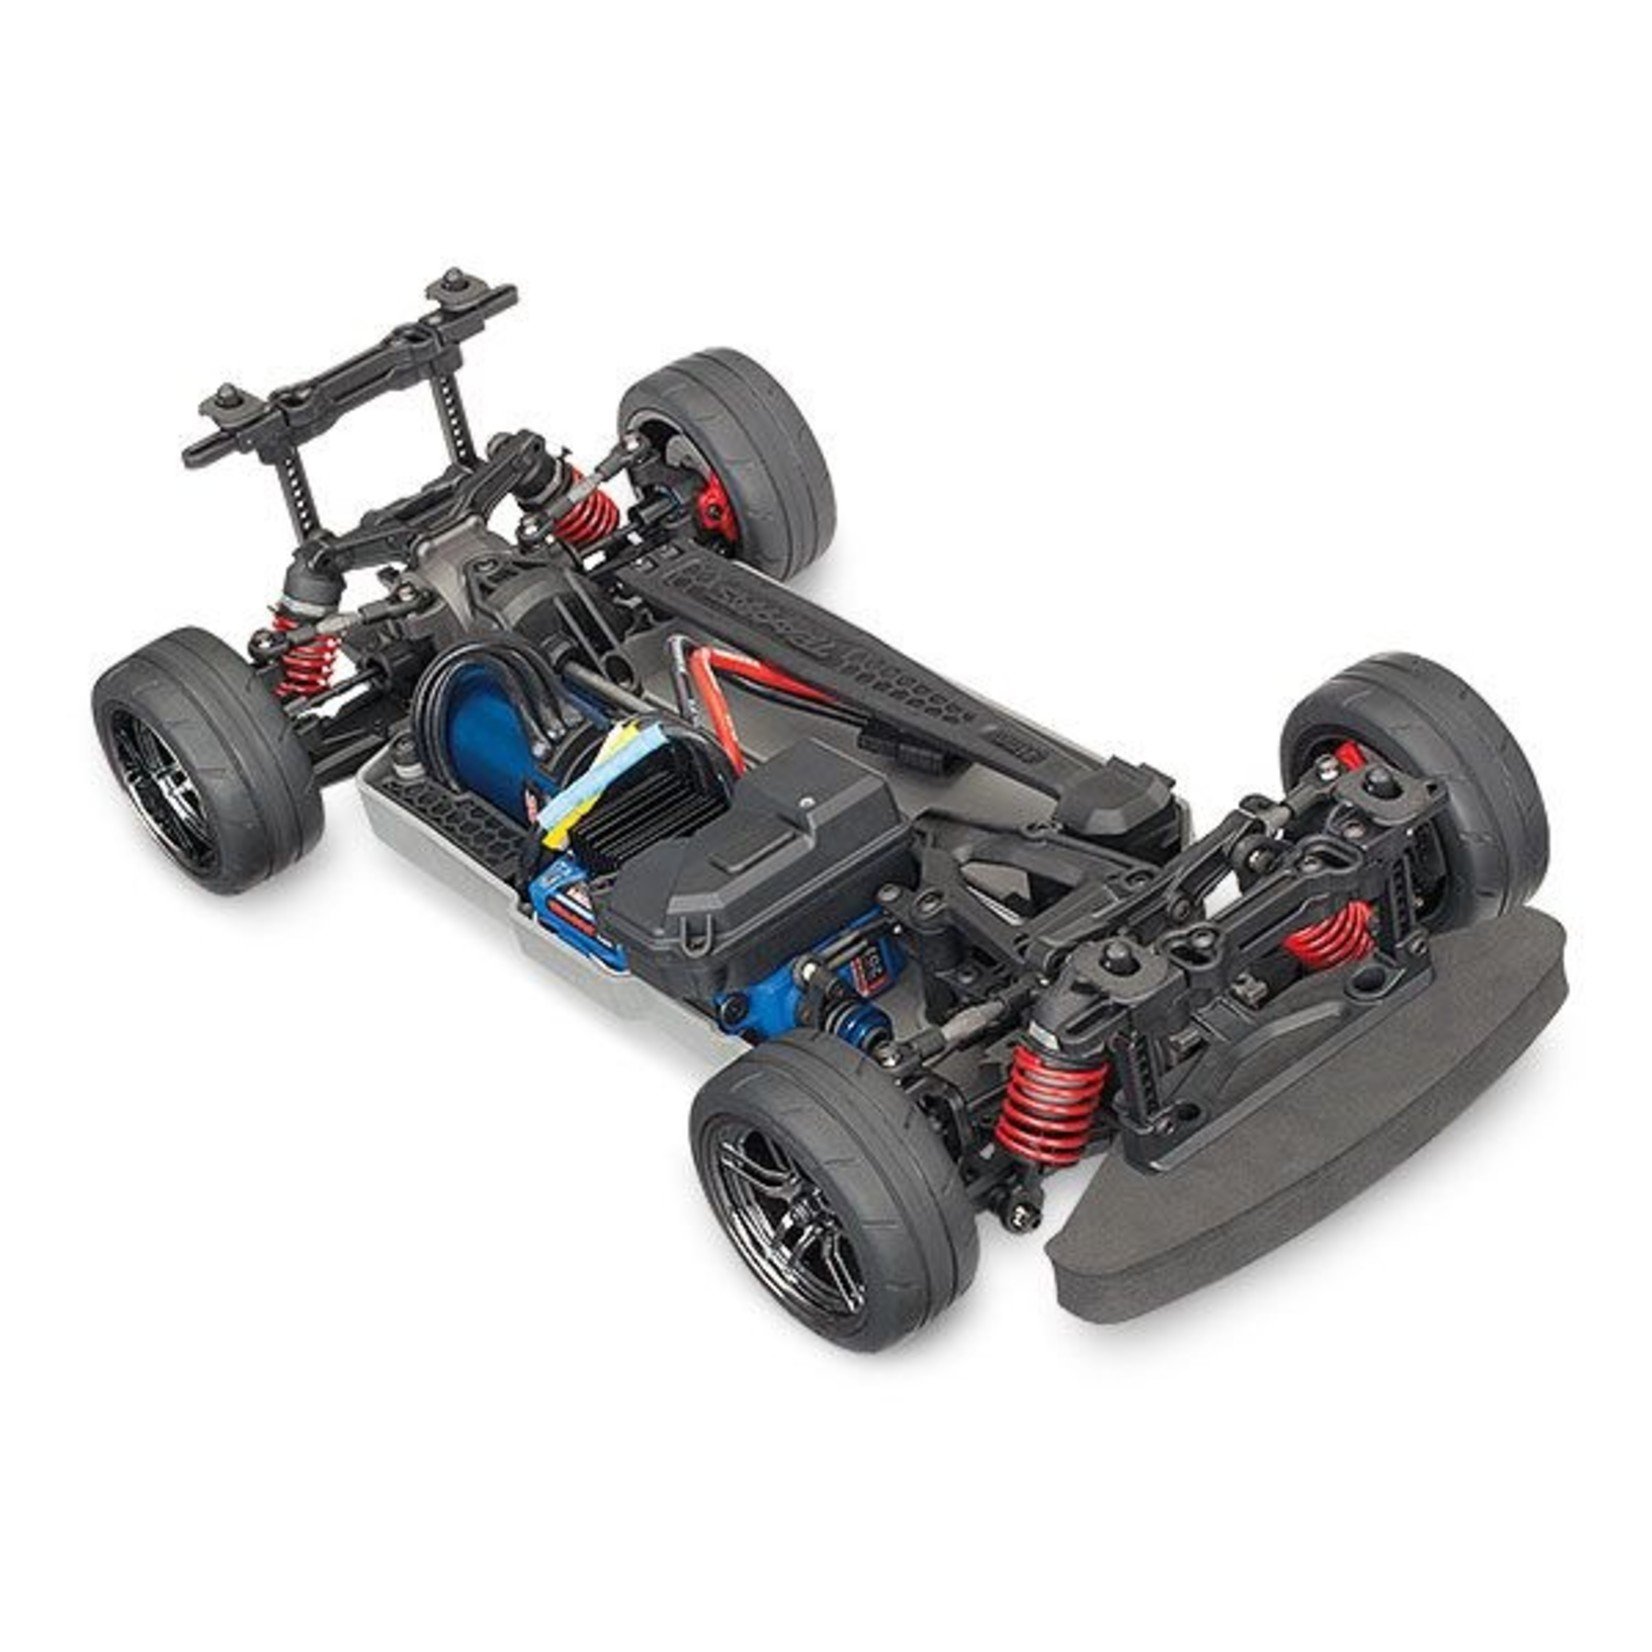 Traxxas 83076-4-R6 - 4-Tec 2.0 VXL: 1/10 Scale AWD Chassis